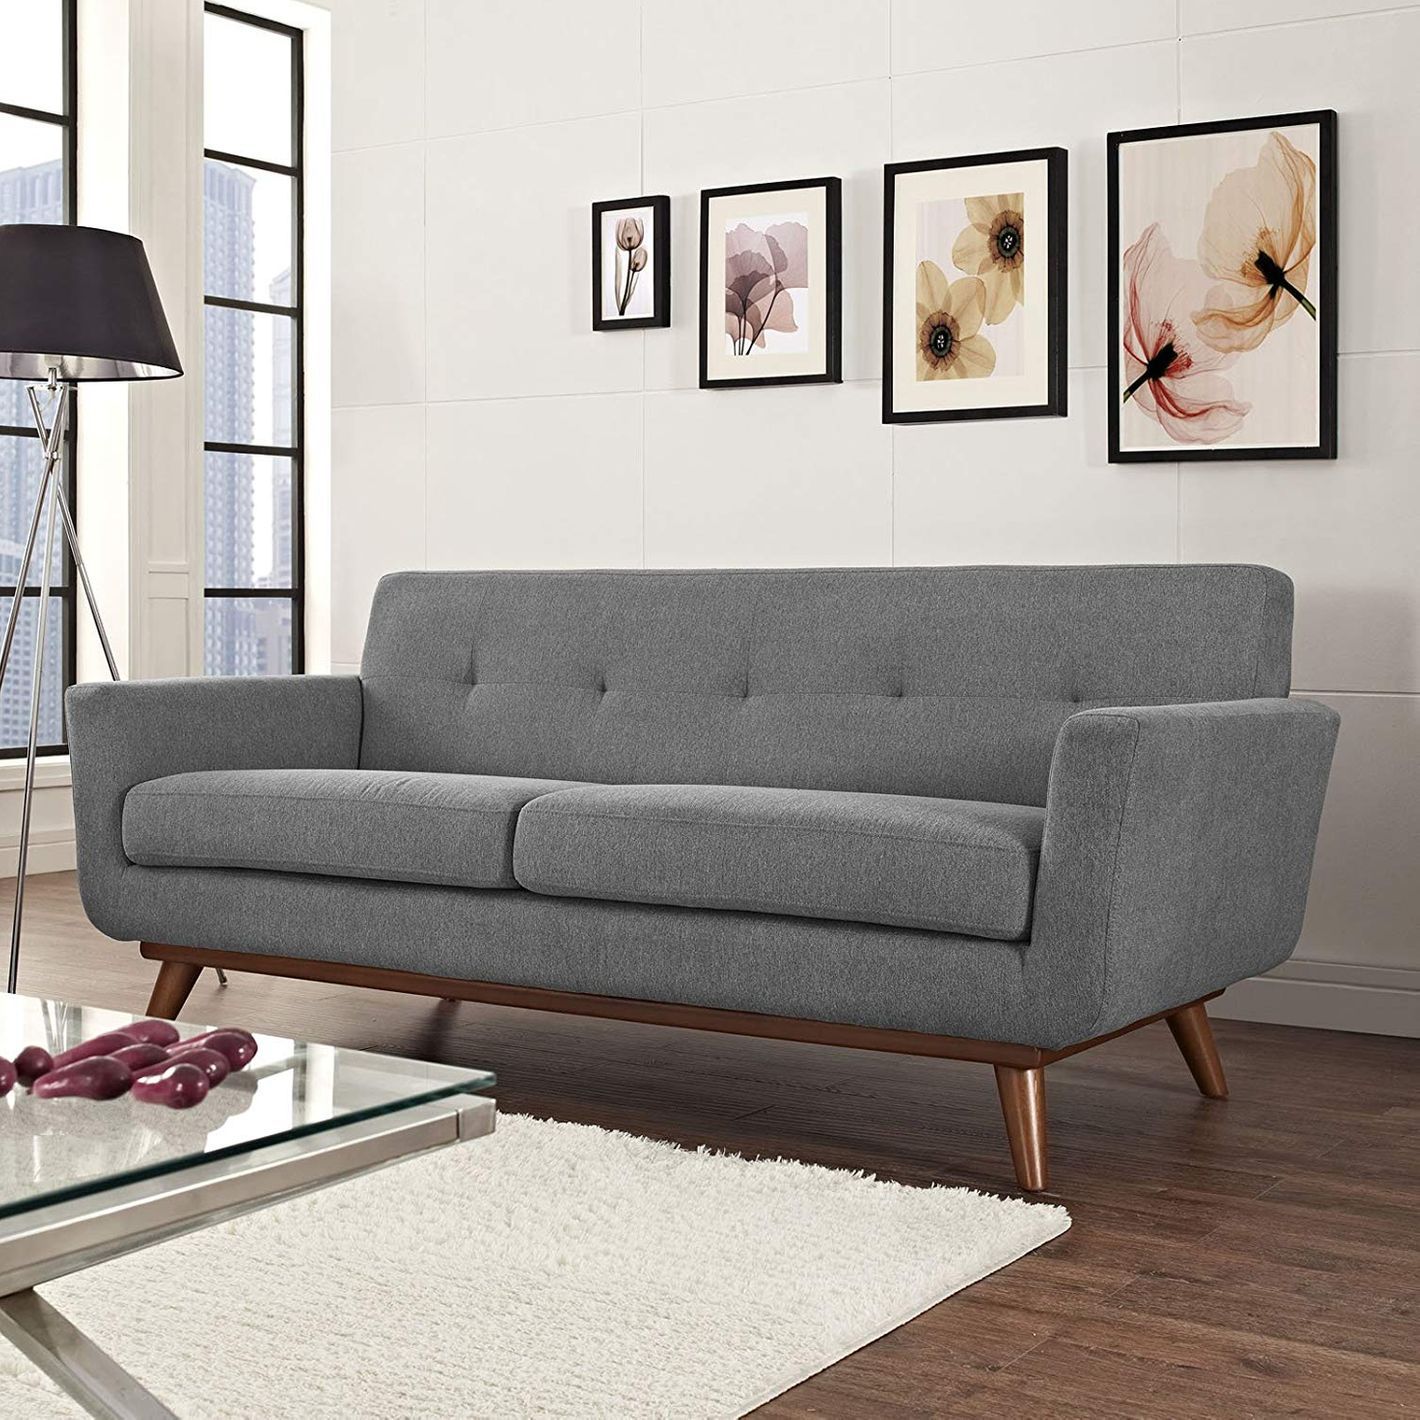 8 Best Love Seats 2021 | The Strategist With Modern Loveseat Sofas (Gallery 1 of 20)